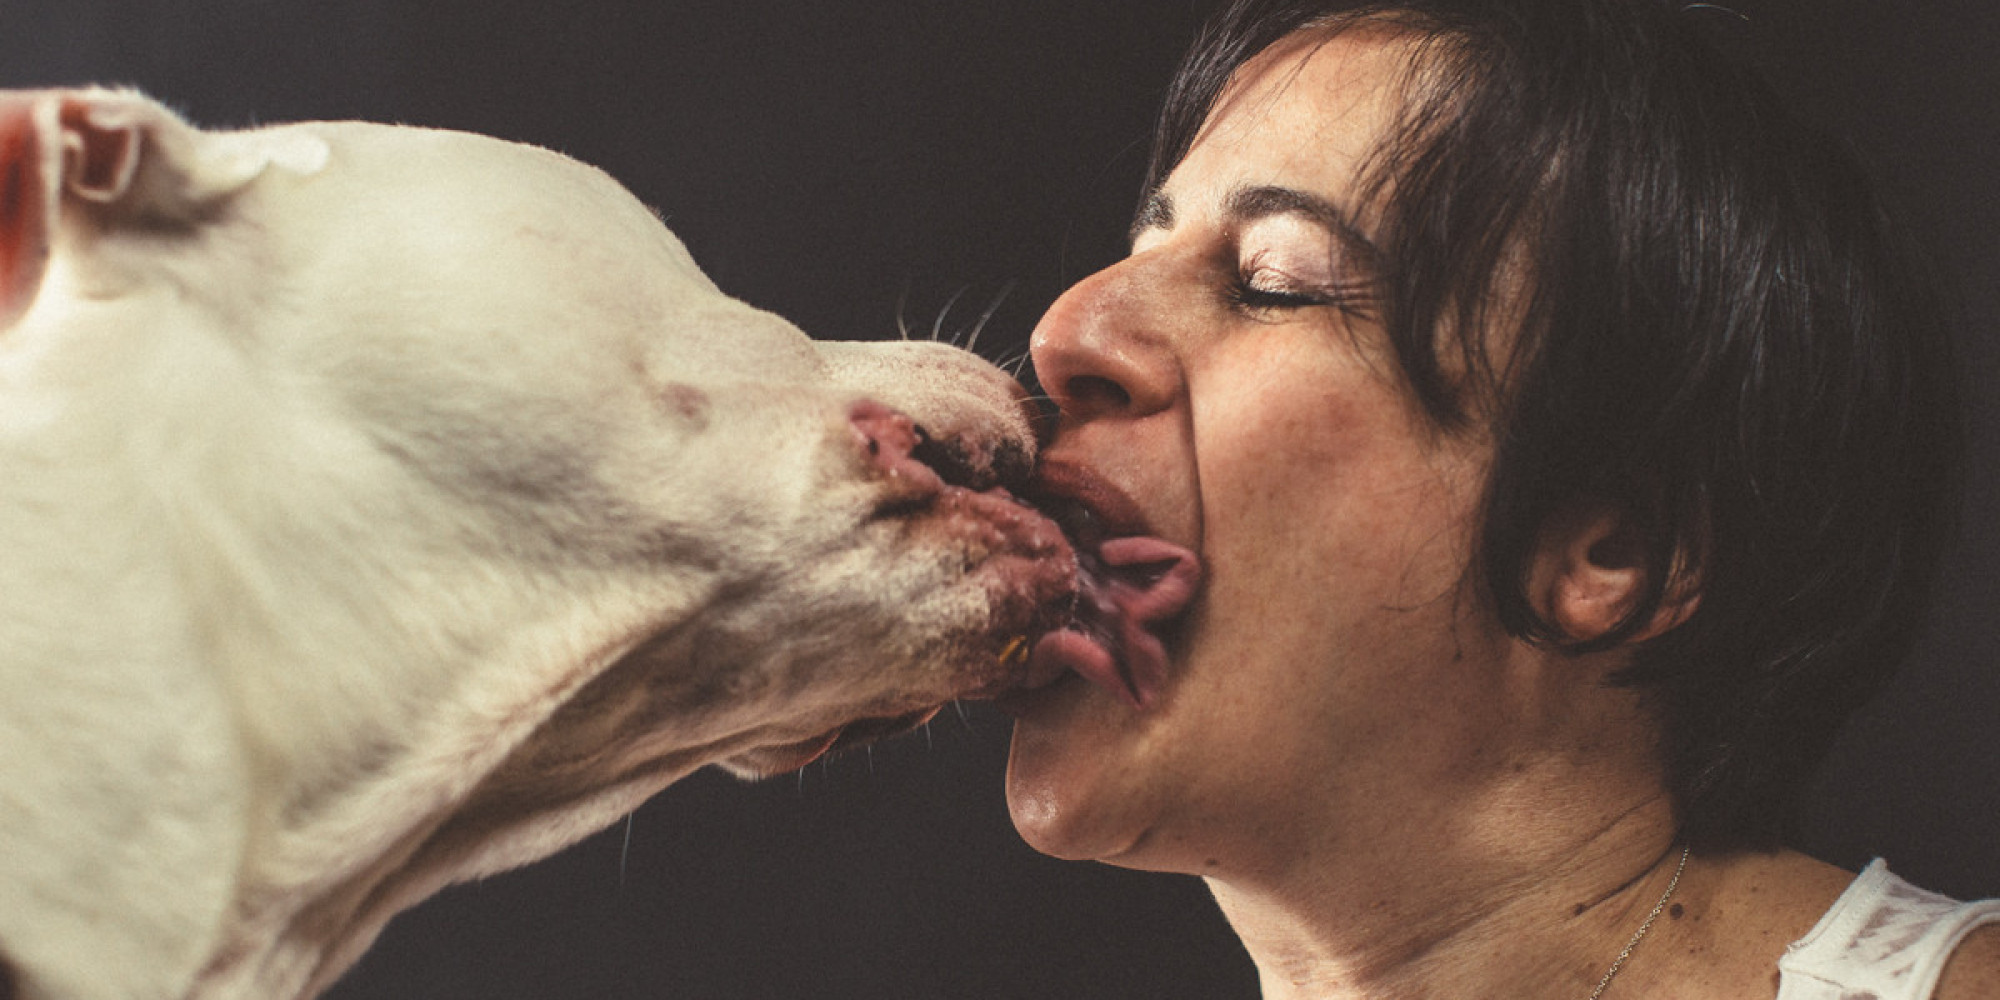 21 Gloriously Sloppy Kisses From Dog To Owner